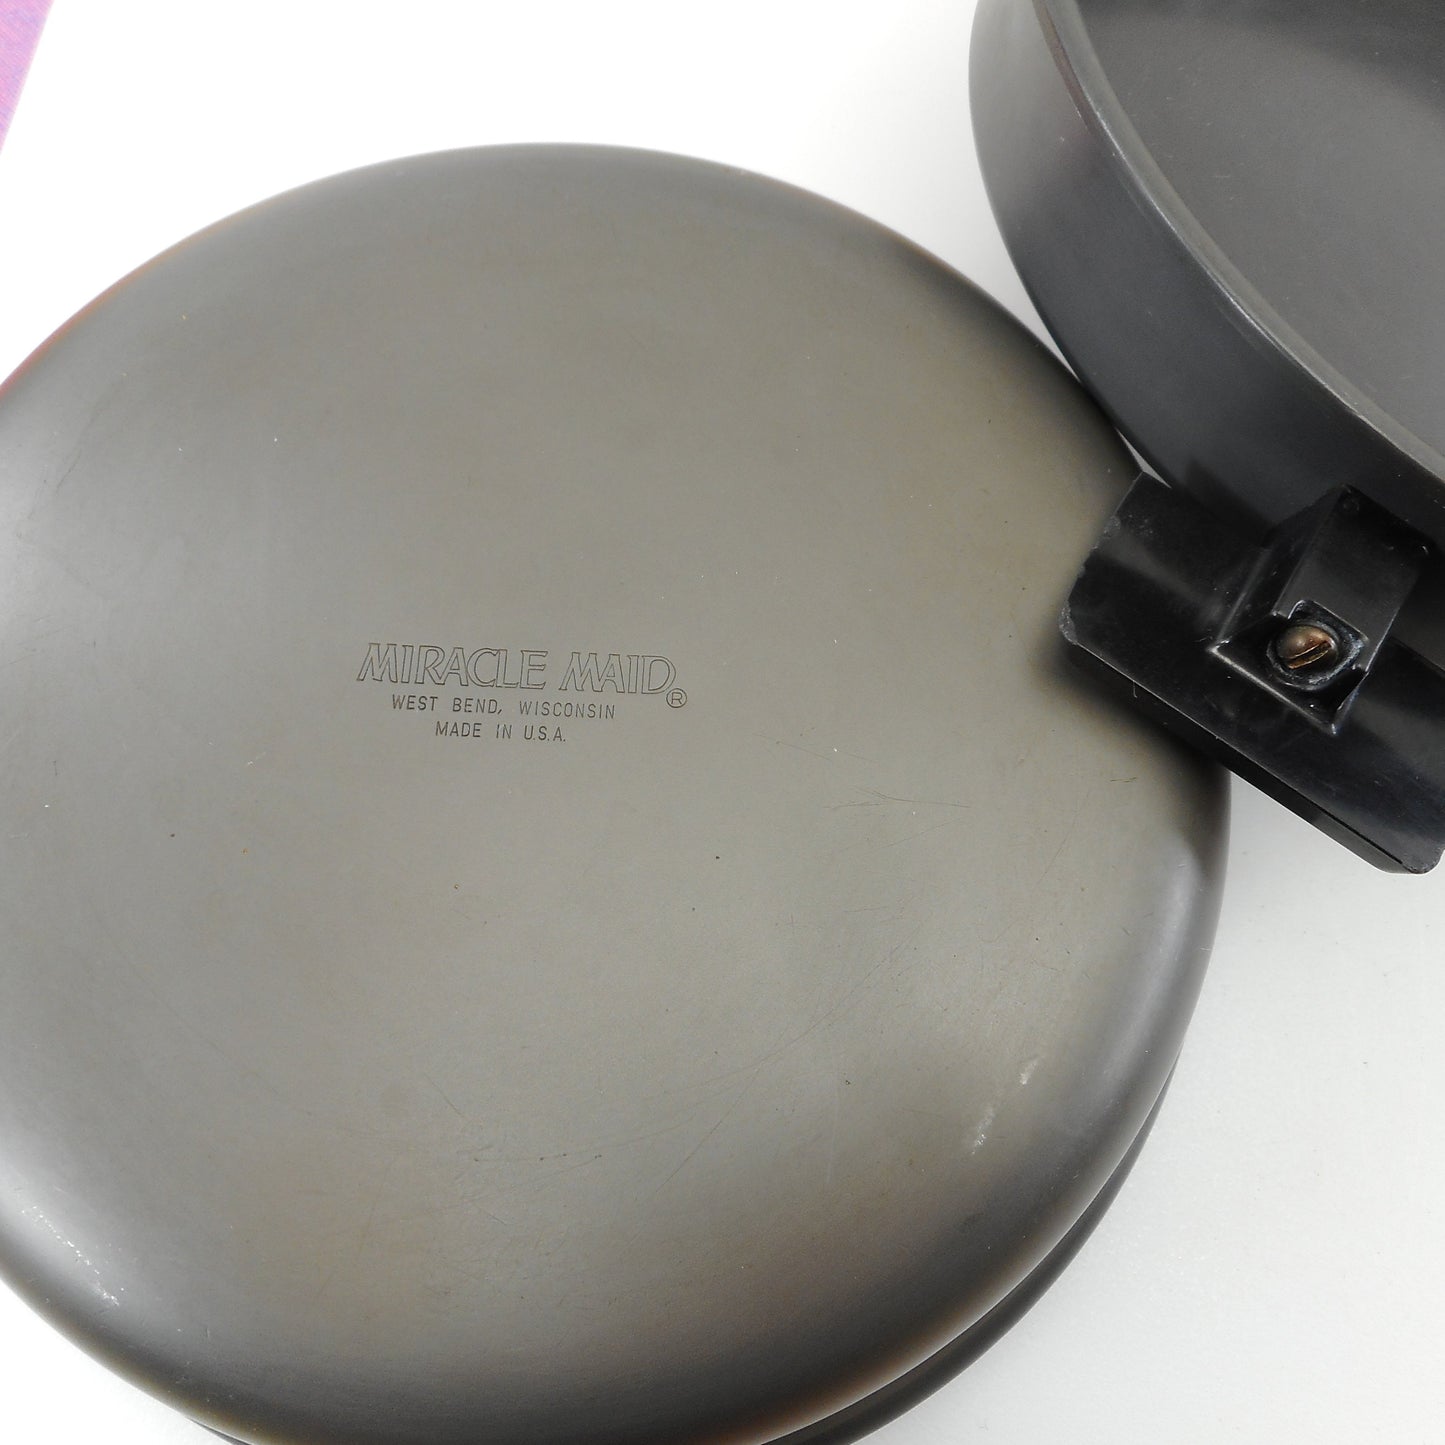 West Bend Miracle Maid Anodized 8" Skillet & Lid 1970's